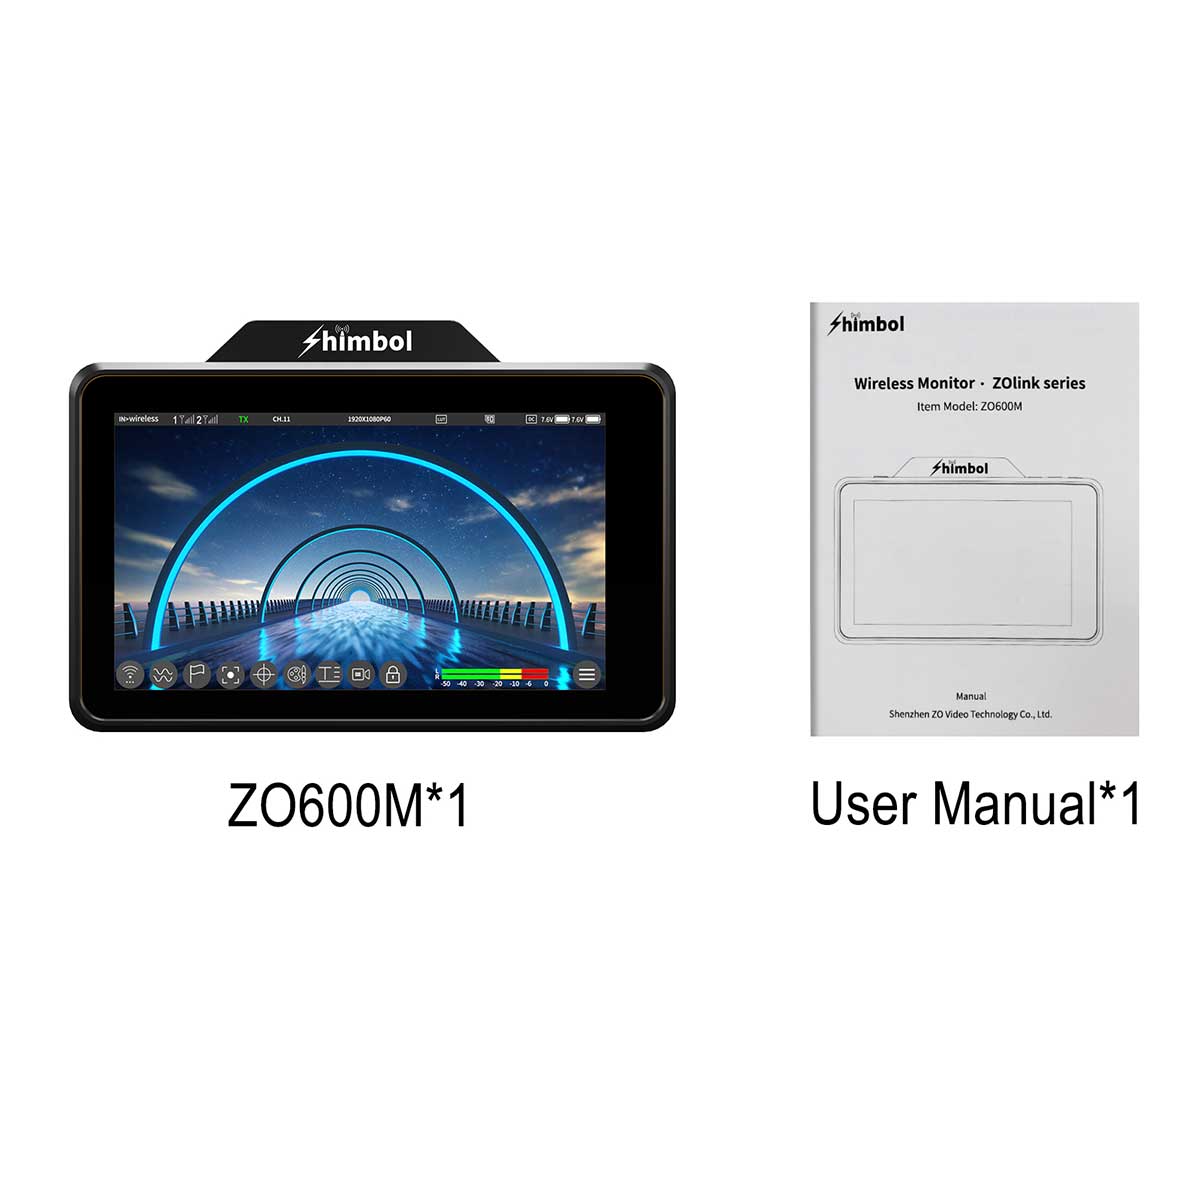 Shimbol ZO600M 5.5 Inch 5G Wifi Wireless Video Monitor with Free Switch Transmitter Receiver 1000nit HDR Recording Playback